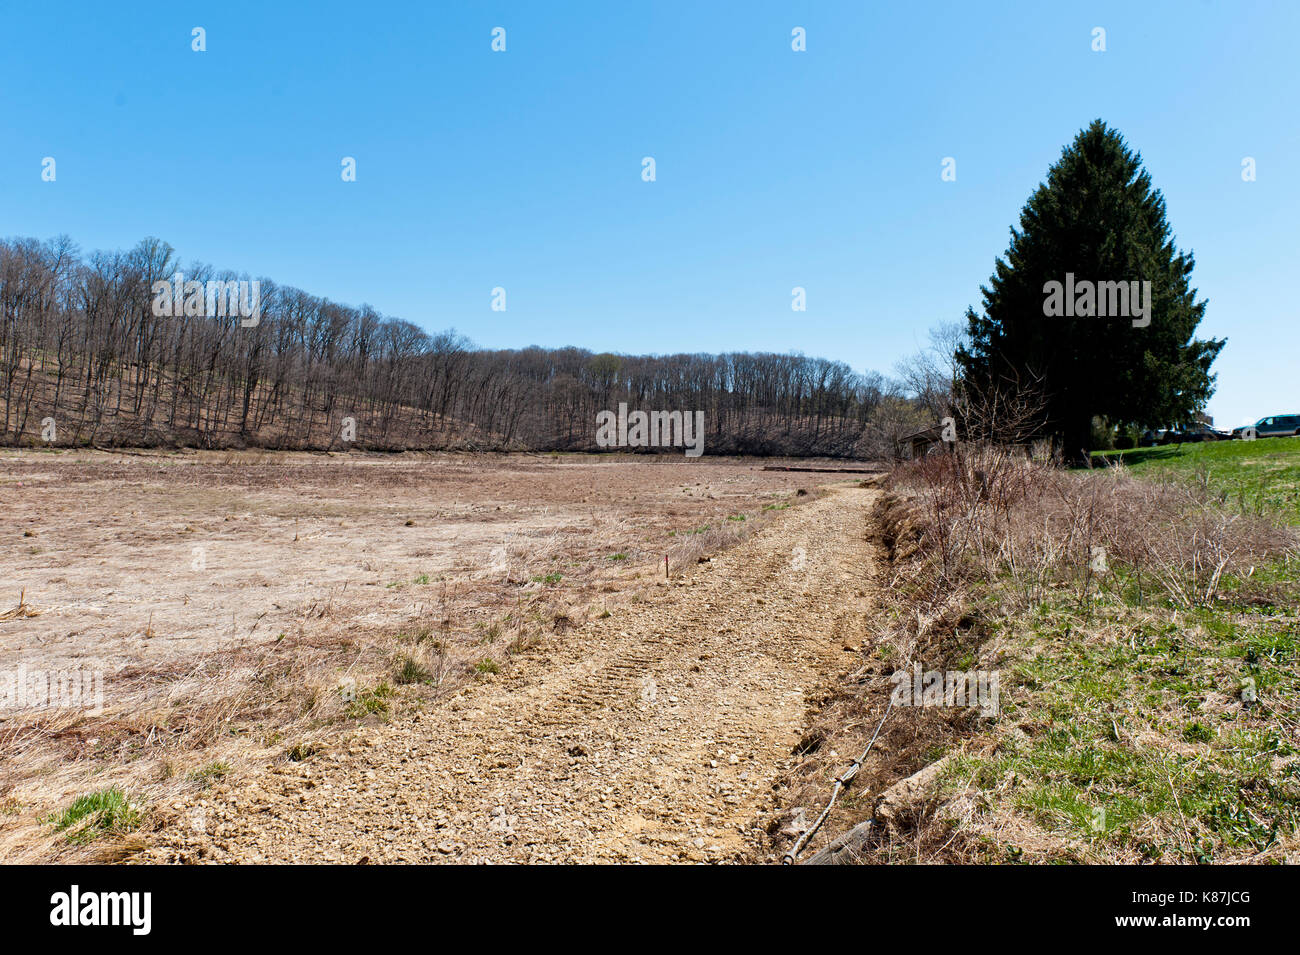 CONSTRUCTION PATH THROUGH DRY LAKE BED OF SPEEDWELL FORGE LAKE AFTER DRAINING DUE TO DAM DAMAGE, LITITZ PENNSYLVANIA Stock Photo